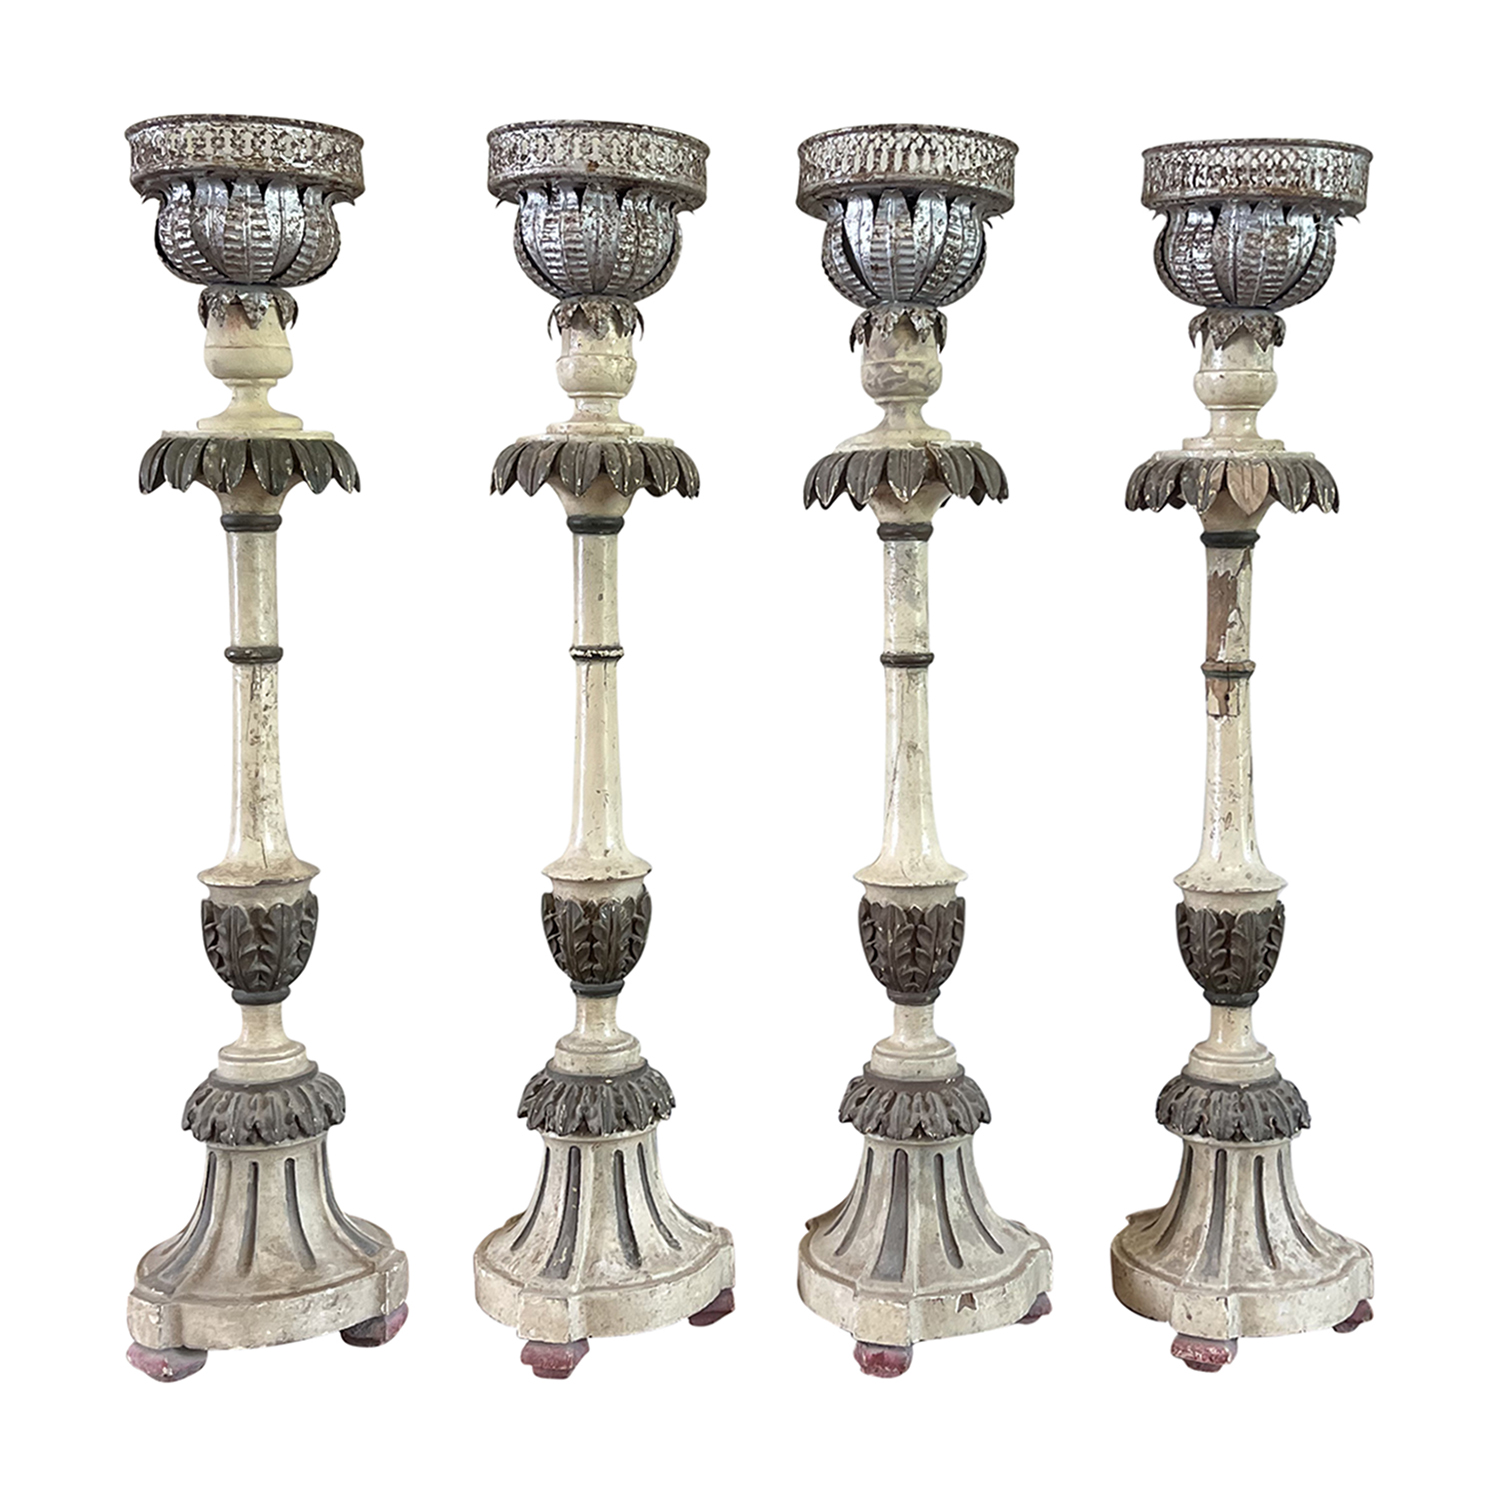 Set of Four Gustavian Candle Holders 1820